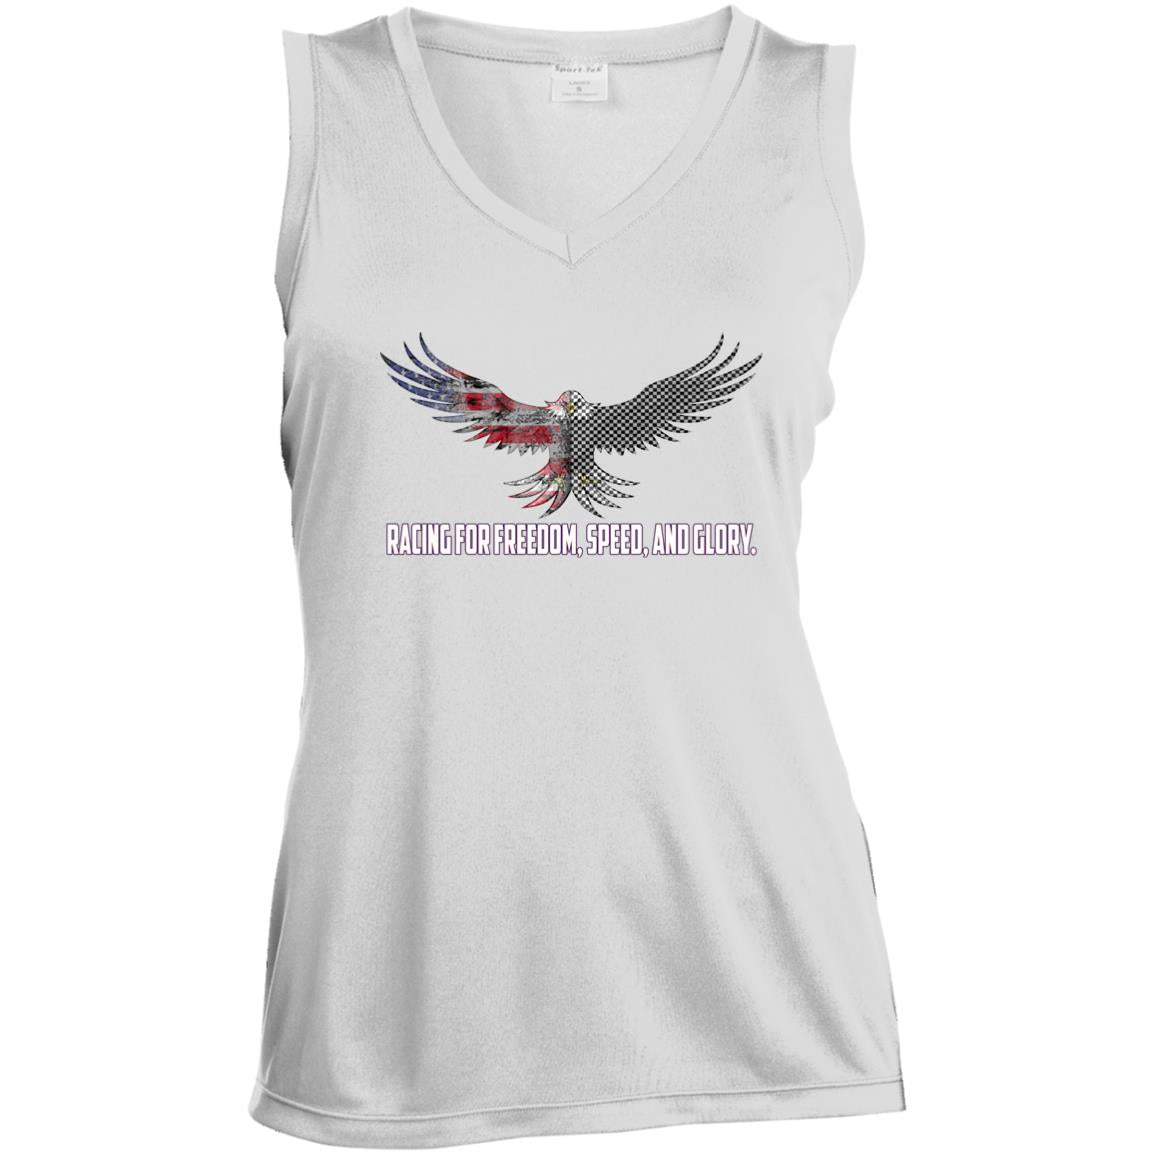 Racing For Freedom, Speed, And Glory Ladies' Sleeveless V-Neck Performance Tee